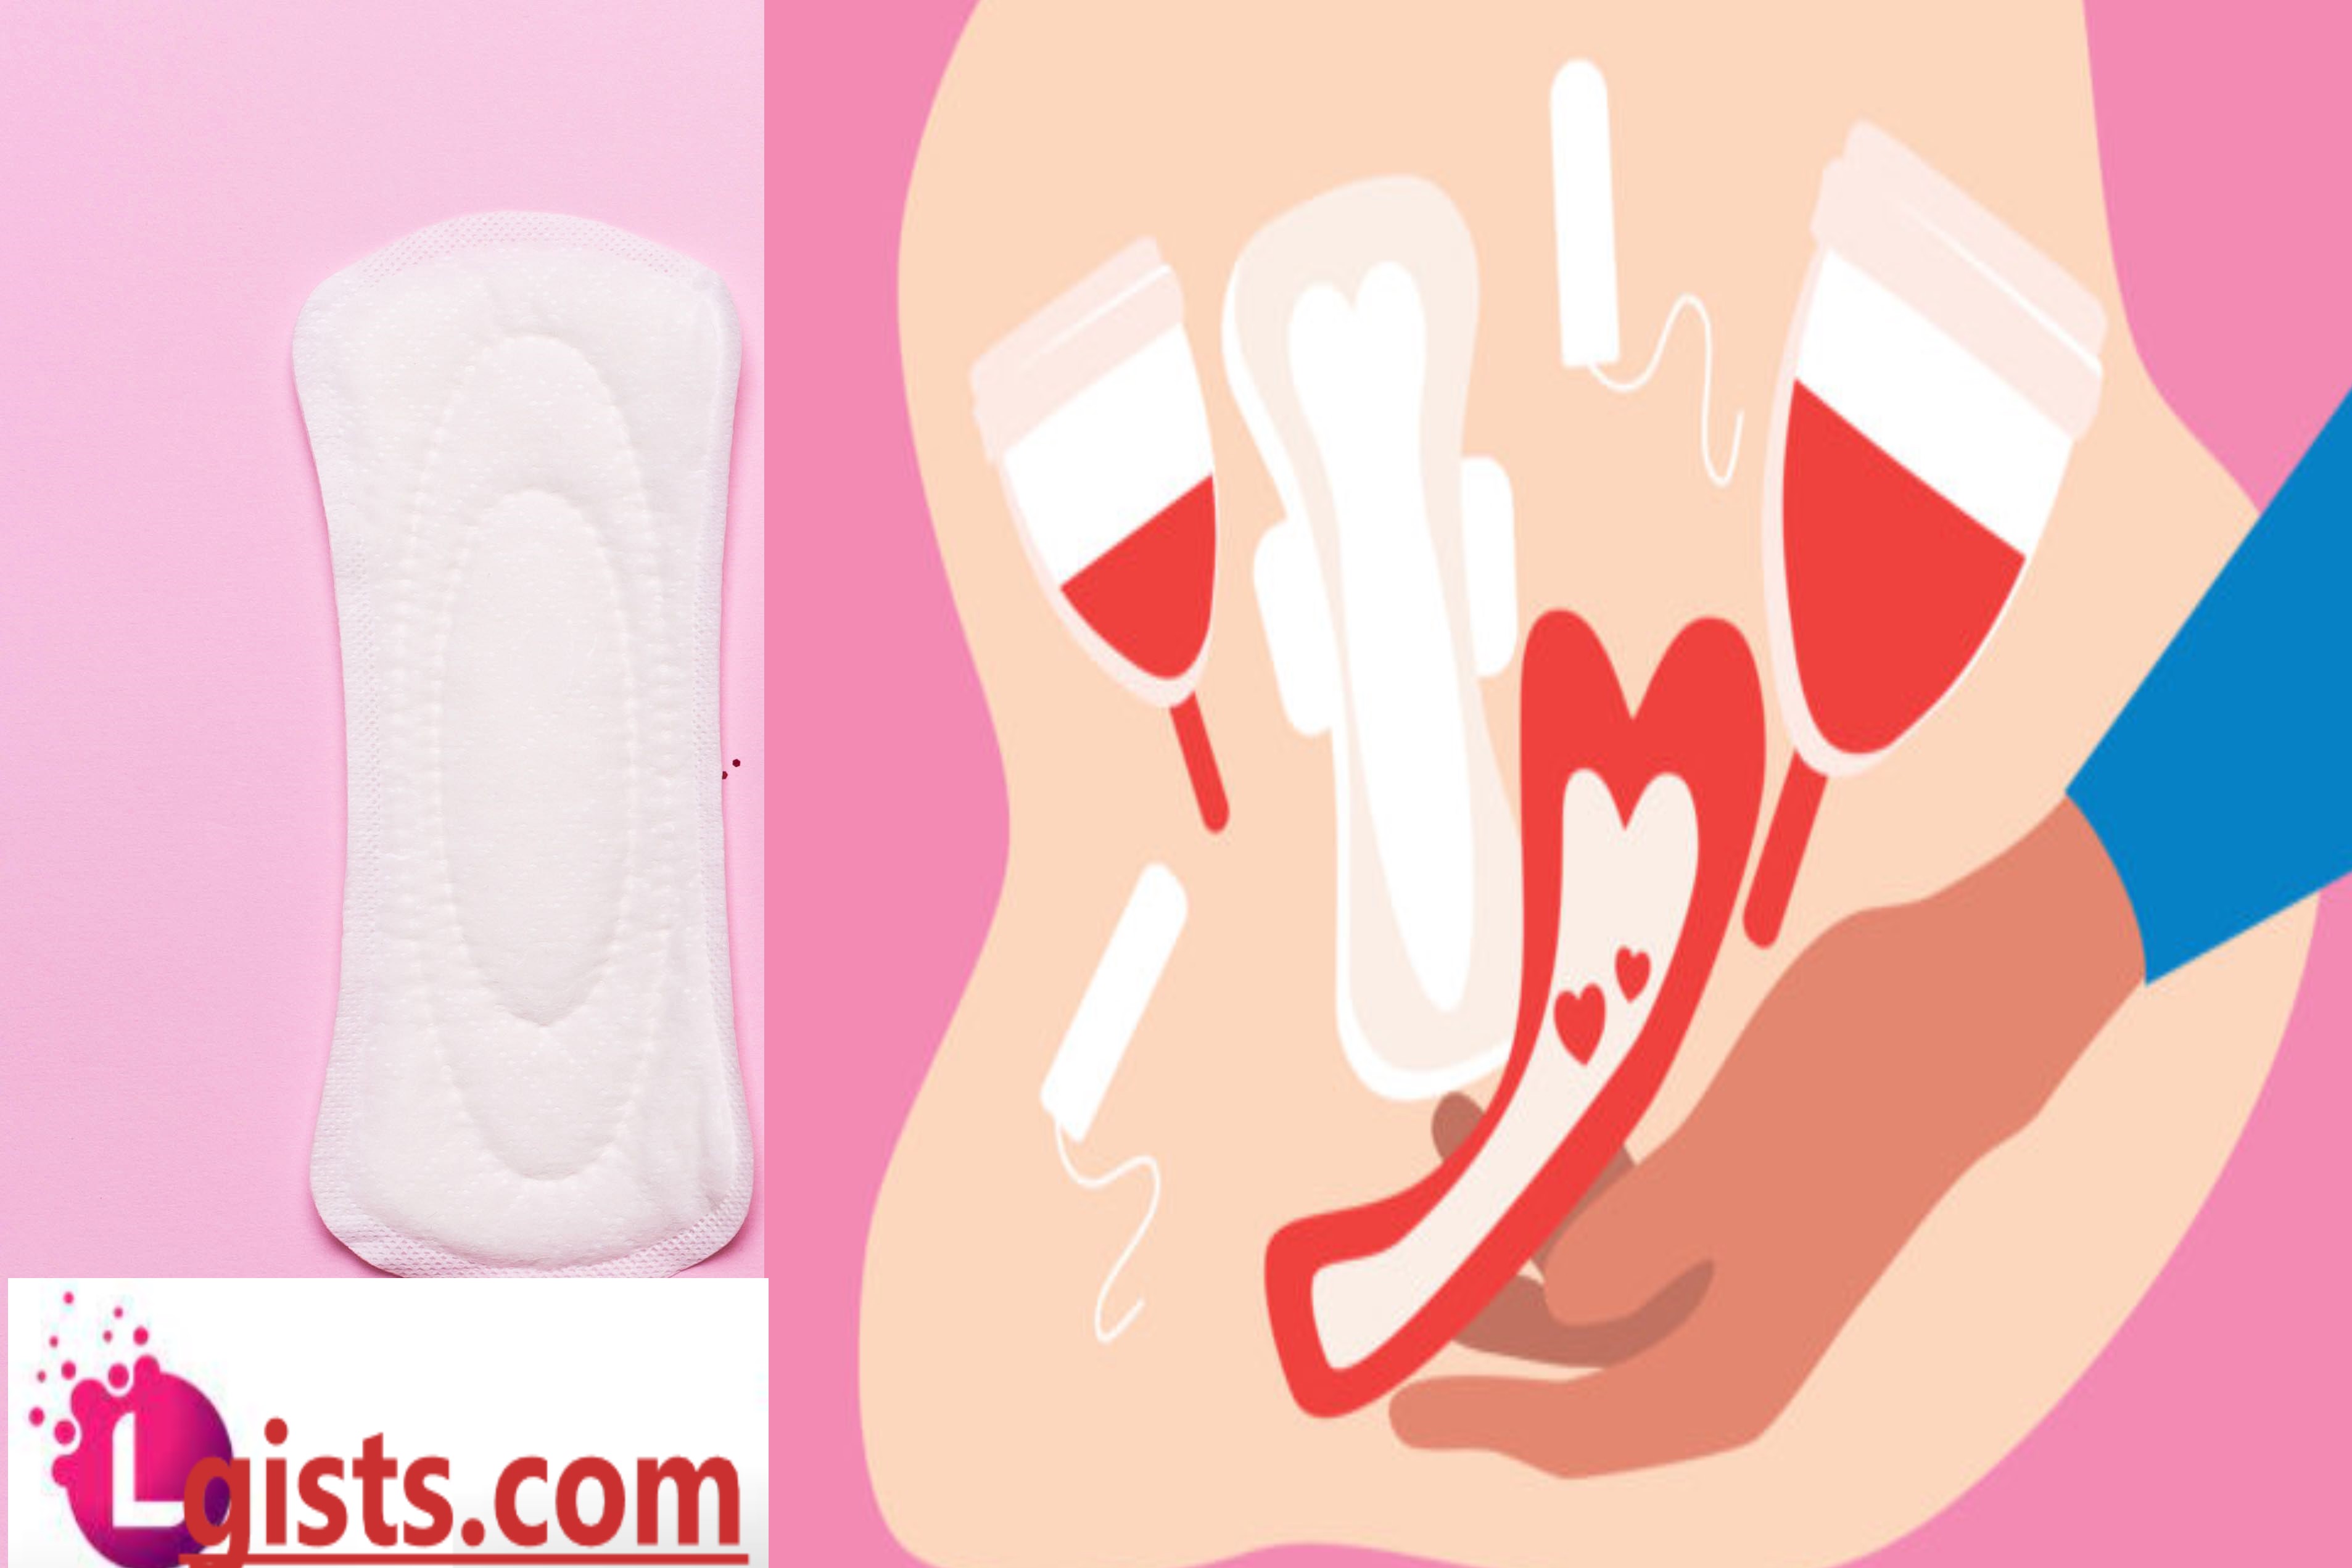 Tips for using sanitary pads during the menstrual period.